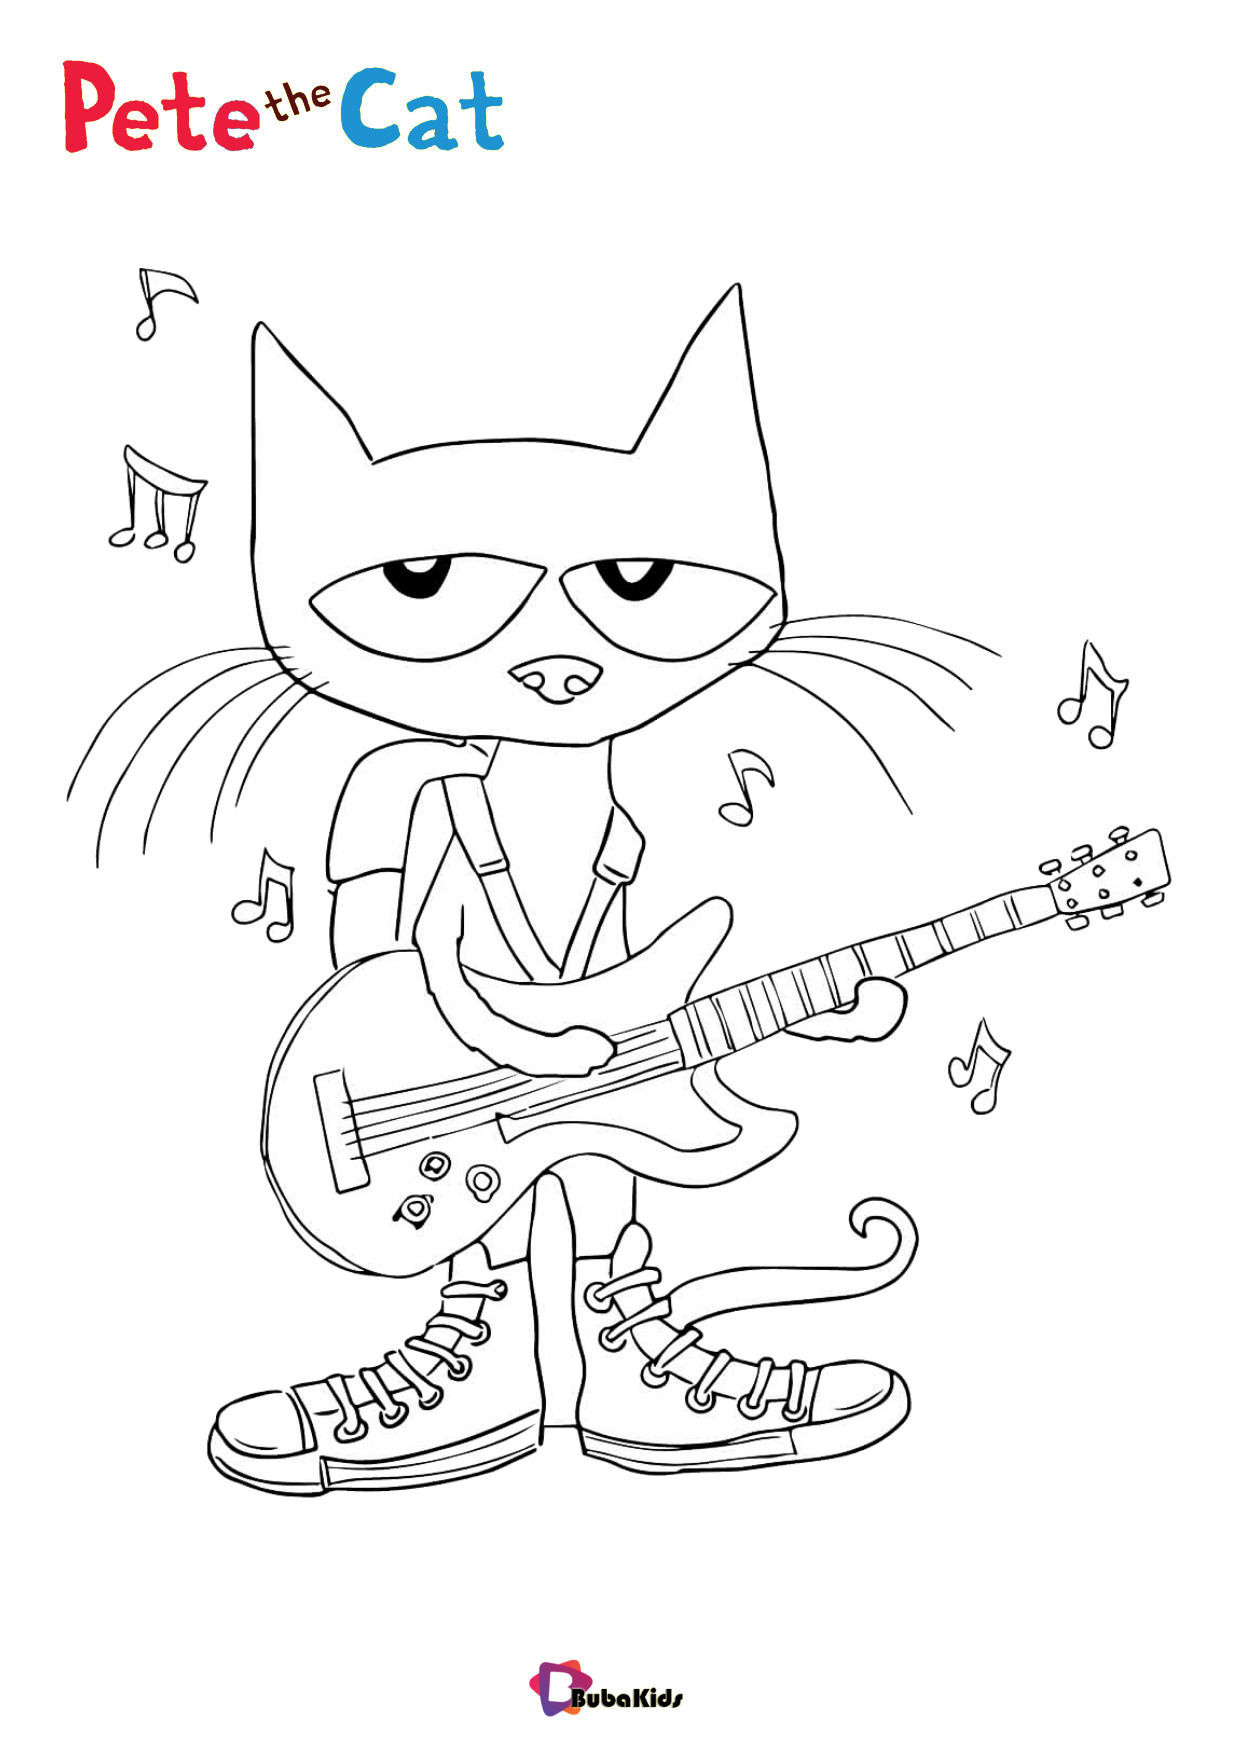 Pete the Cat playing guitar coloring page cartoon cat Wallpaper